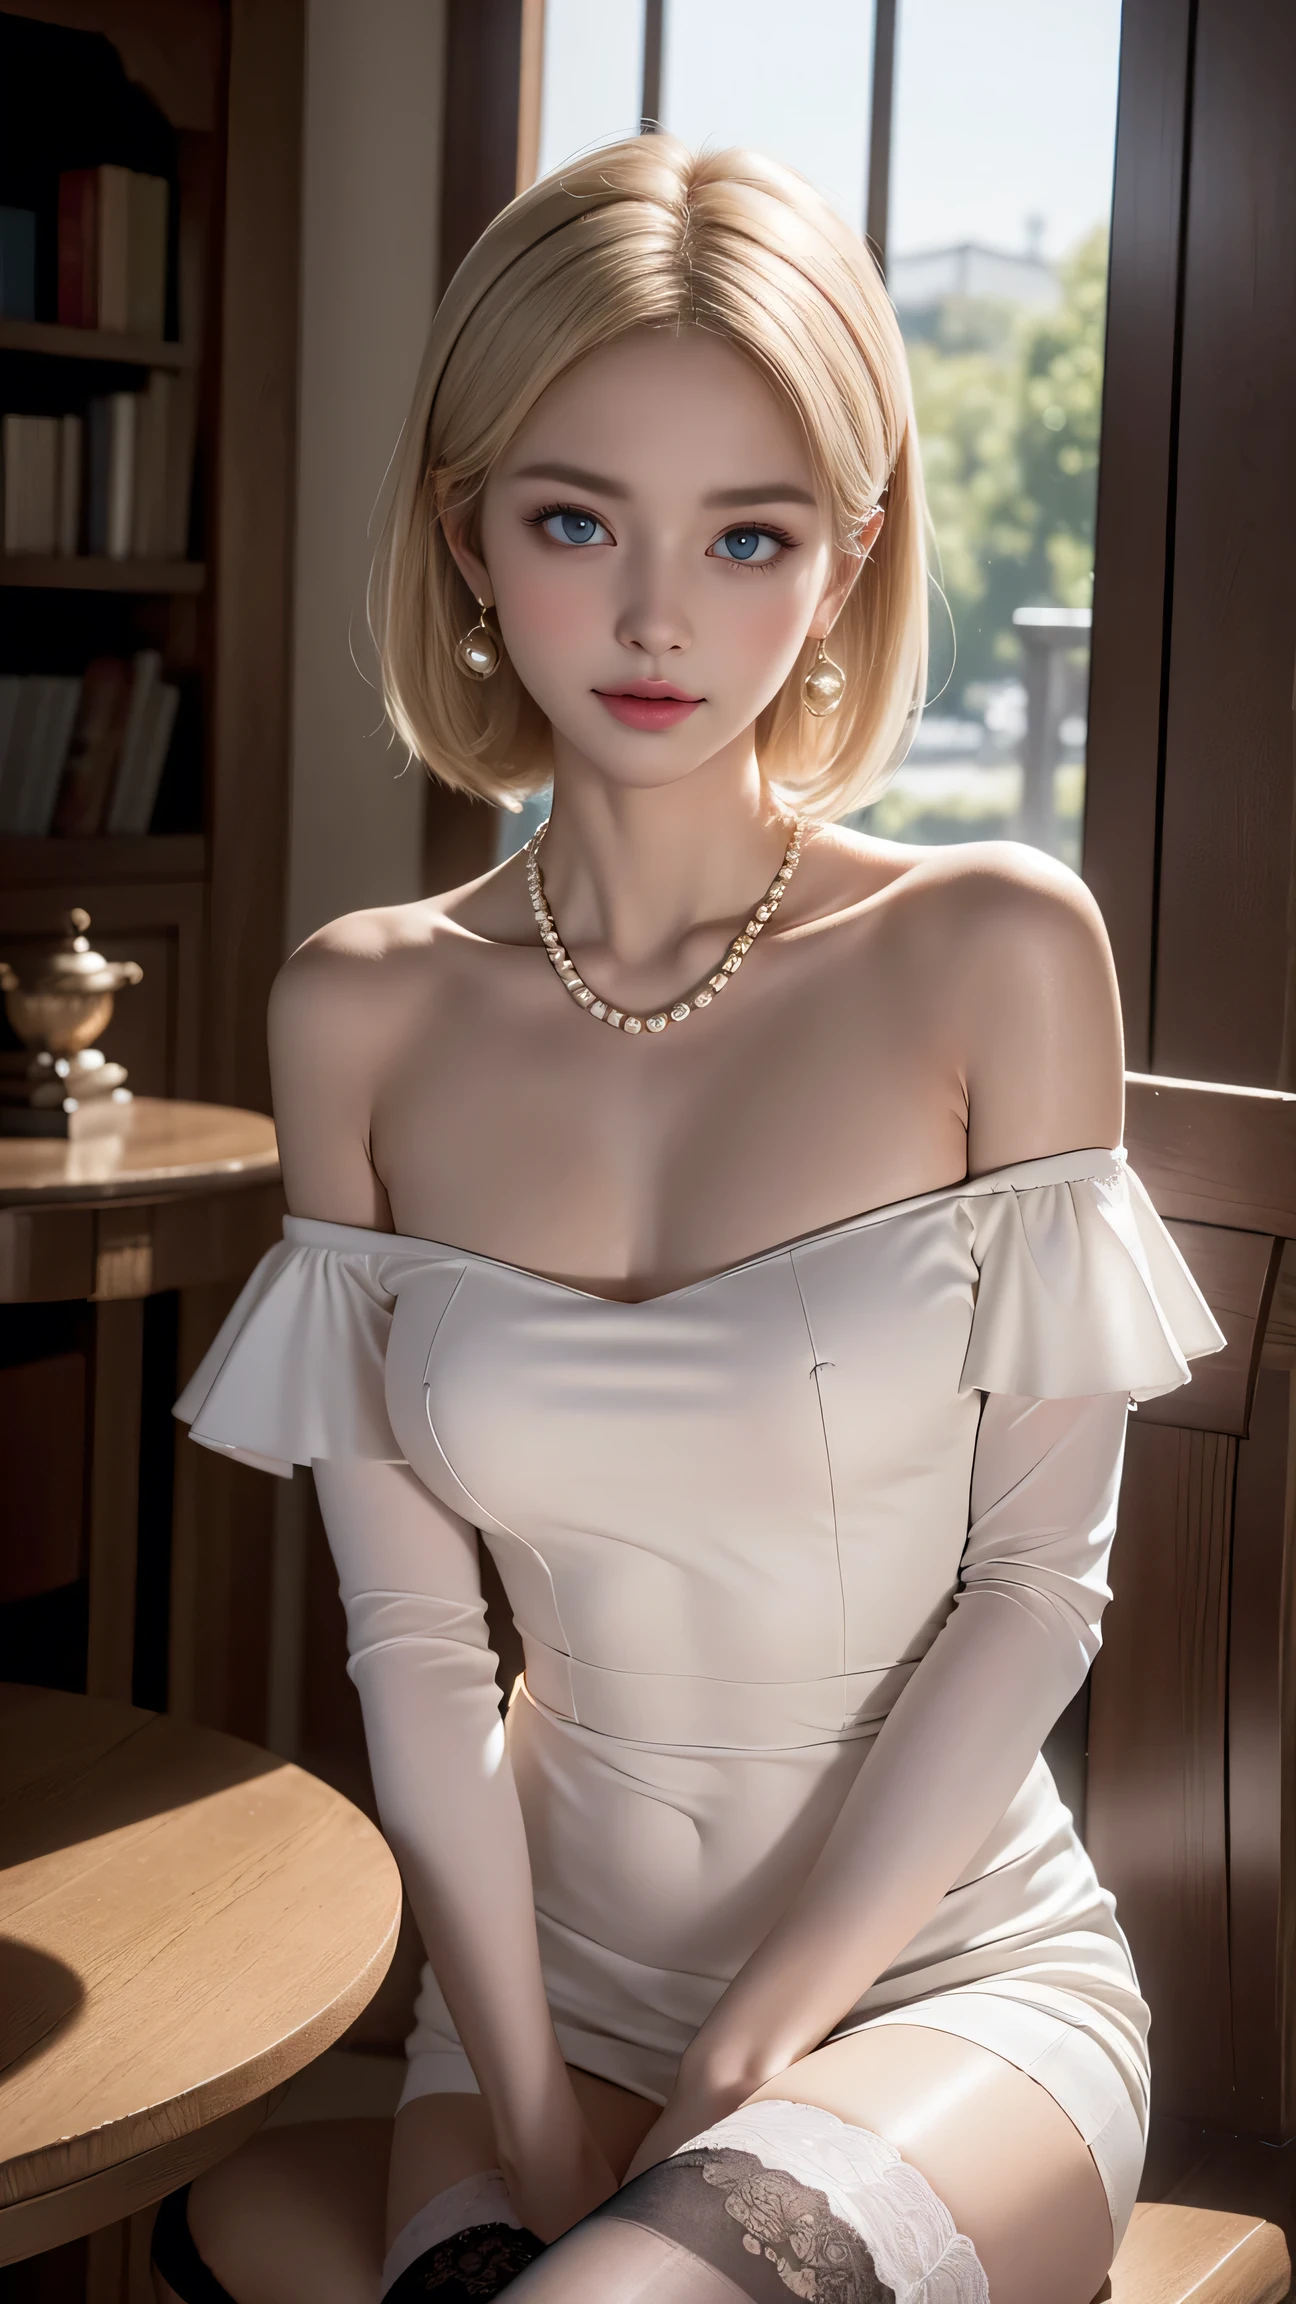 （(Girl sitting on chair in library))、Best quality work，Actual work，jewelry、(Pearl Necklace、Earrings),Ultra Premium Graphics，8K HD CG Works，High quality graphics，High-definition CG works，10x pixels，Extremely fine detail：1.1，Advanced Technical Details：1.1 Photorealistic，Indoor lighting effects：1.5，Natural light：1.5. Light effects（virtual Light effects：1.8）,((Golden white short hair)）、（Bob Hair）, Thin eyebrows，High nose, Nice red lips, Rose Cheeks, A face with subtle makeup , Cute face, perfectly balanced face，(），A light-toned foundation enhances the clarity of your skin.、,((Off-the-shoulder pure white dress)). 40k, photograph, Tabletop, highest quality, Rainy background, ((1 Beautiful eyes light haired girl,  White skin, Various poses.((Medium sized breasts,:1.1)), highest quality, Tabletop, Ultra-high resolution, (Realistic:1.4), RAWphotograph, (Perfect figure), (slim:1.3), Slim abdomen, Perfect slim figure, Dynamic Pose, alone, Cold light 12000K, Very detailed facial and skin texture, Fine grain, Realistic eyes, Beautiful fine grain, (Realistic Skin), Charm, 超A high resolution, Surreal, Very detailed、(Black Stockings)、